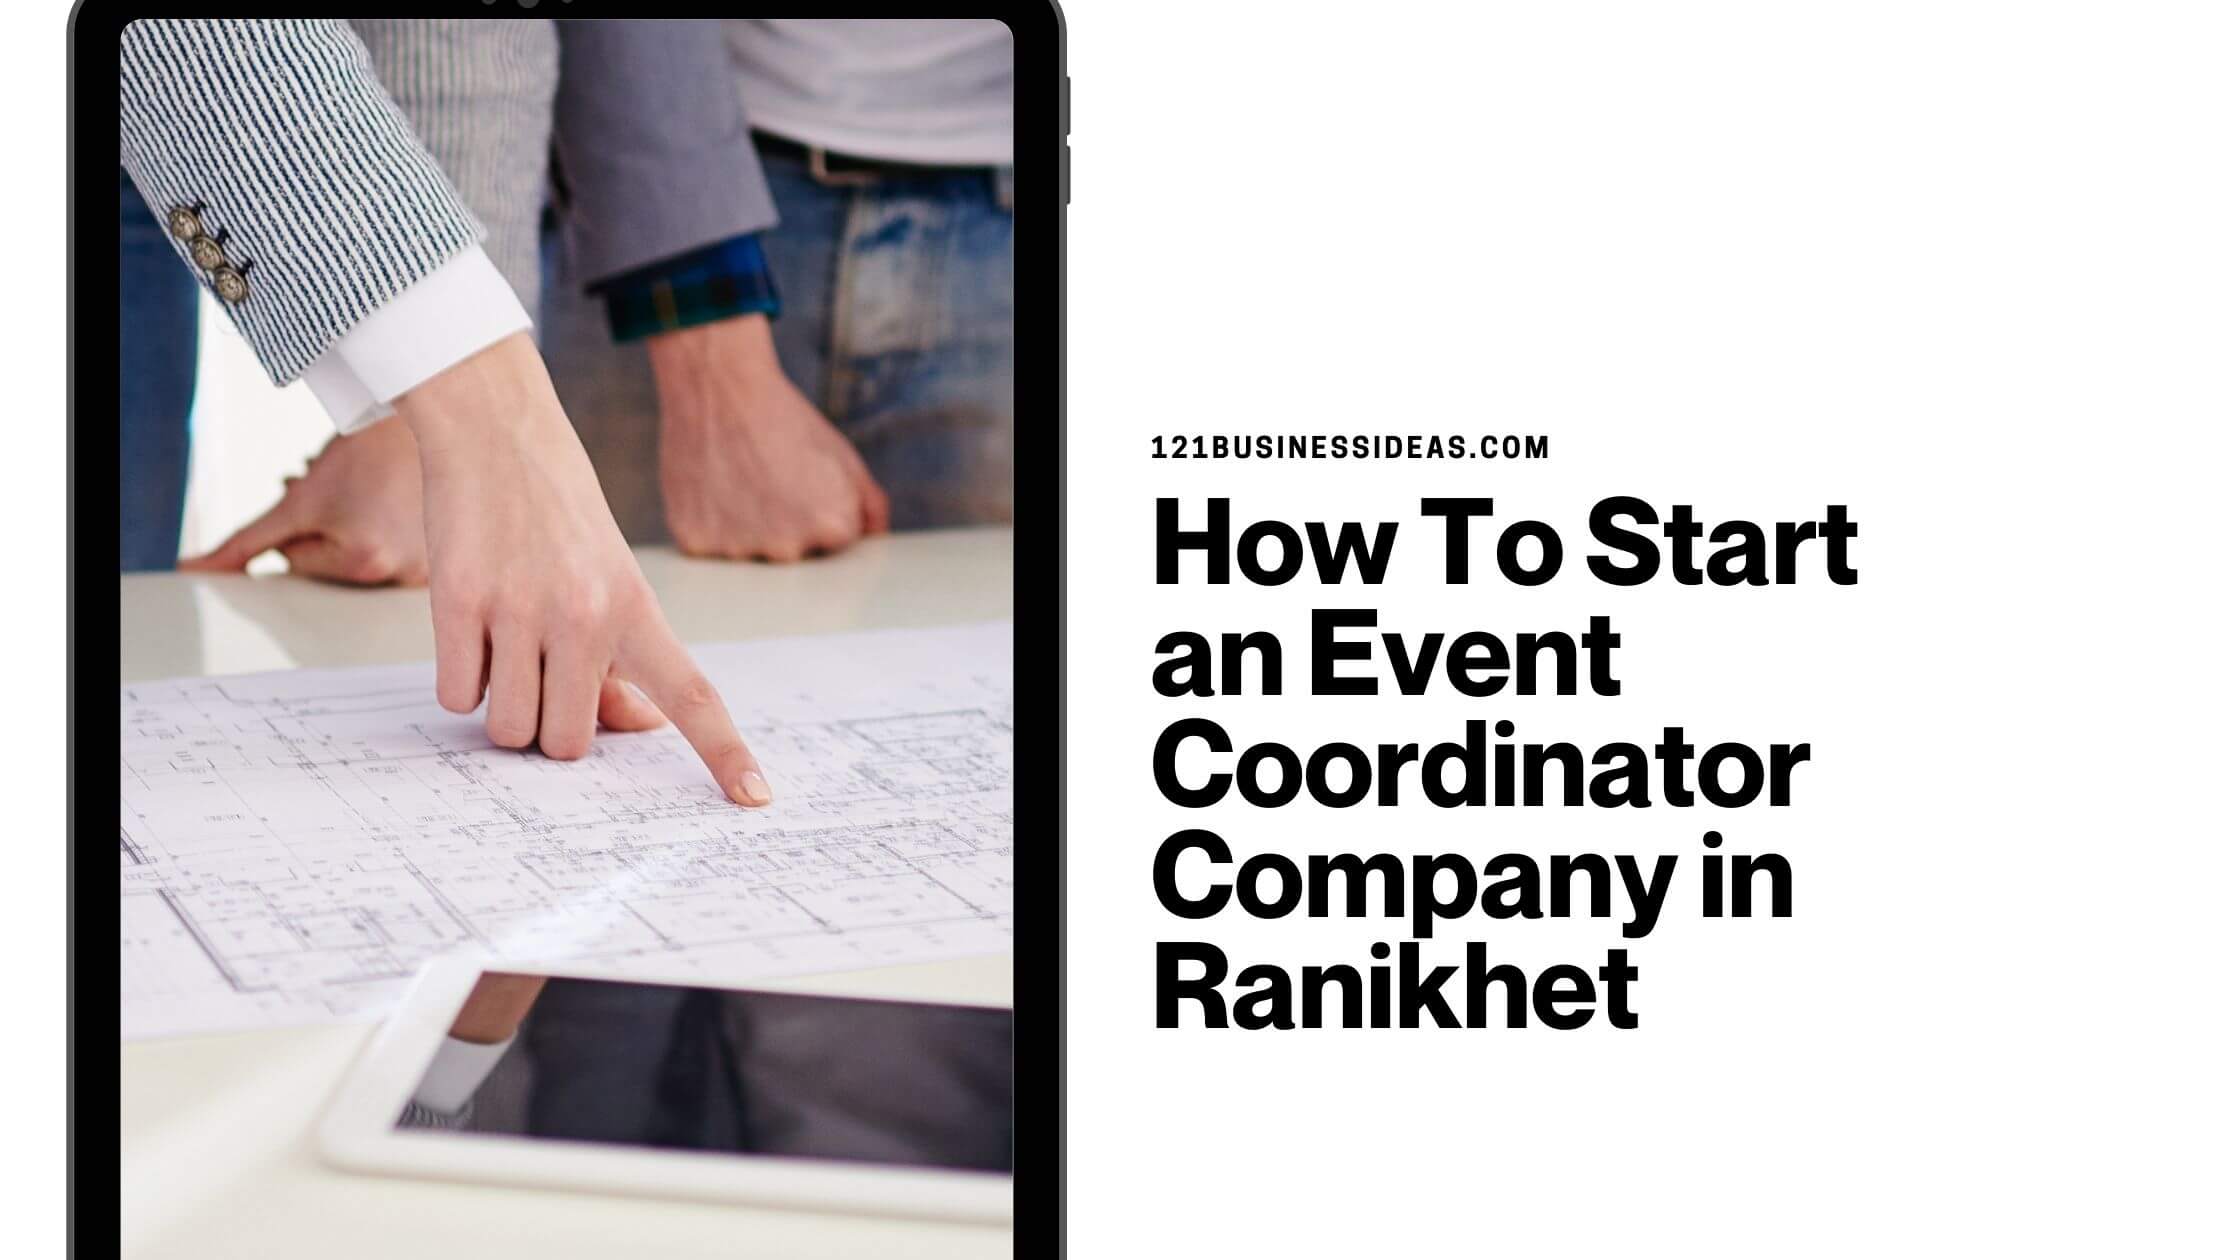 How To Start an Event Coordinator Company in Ranikhet (1)